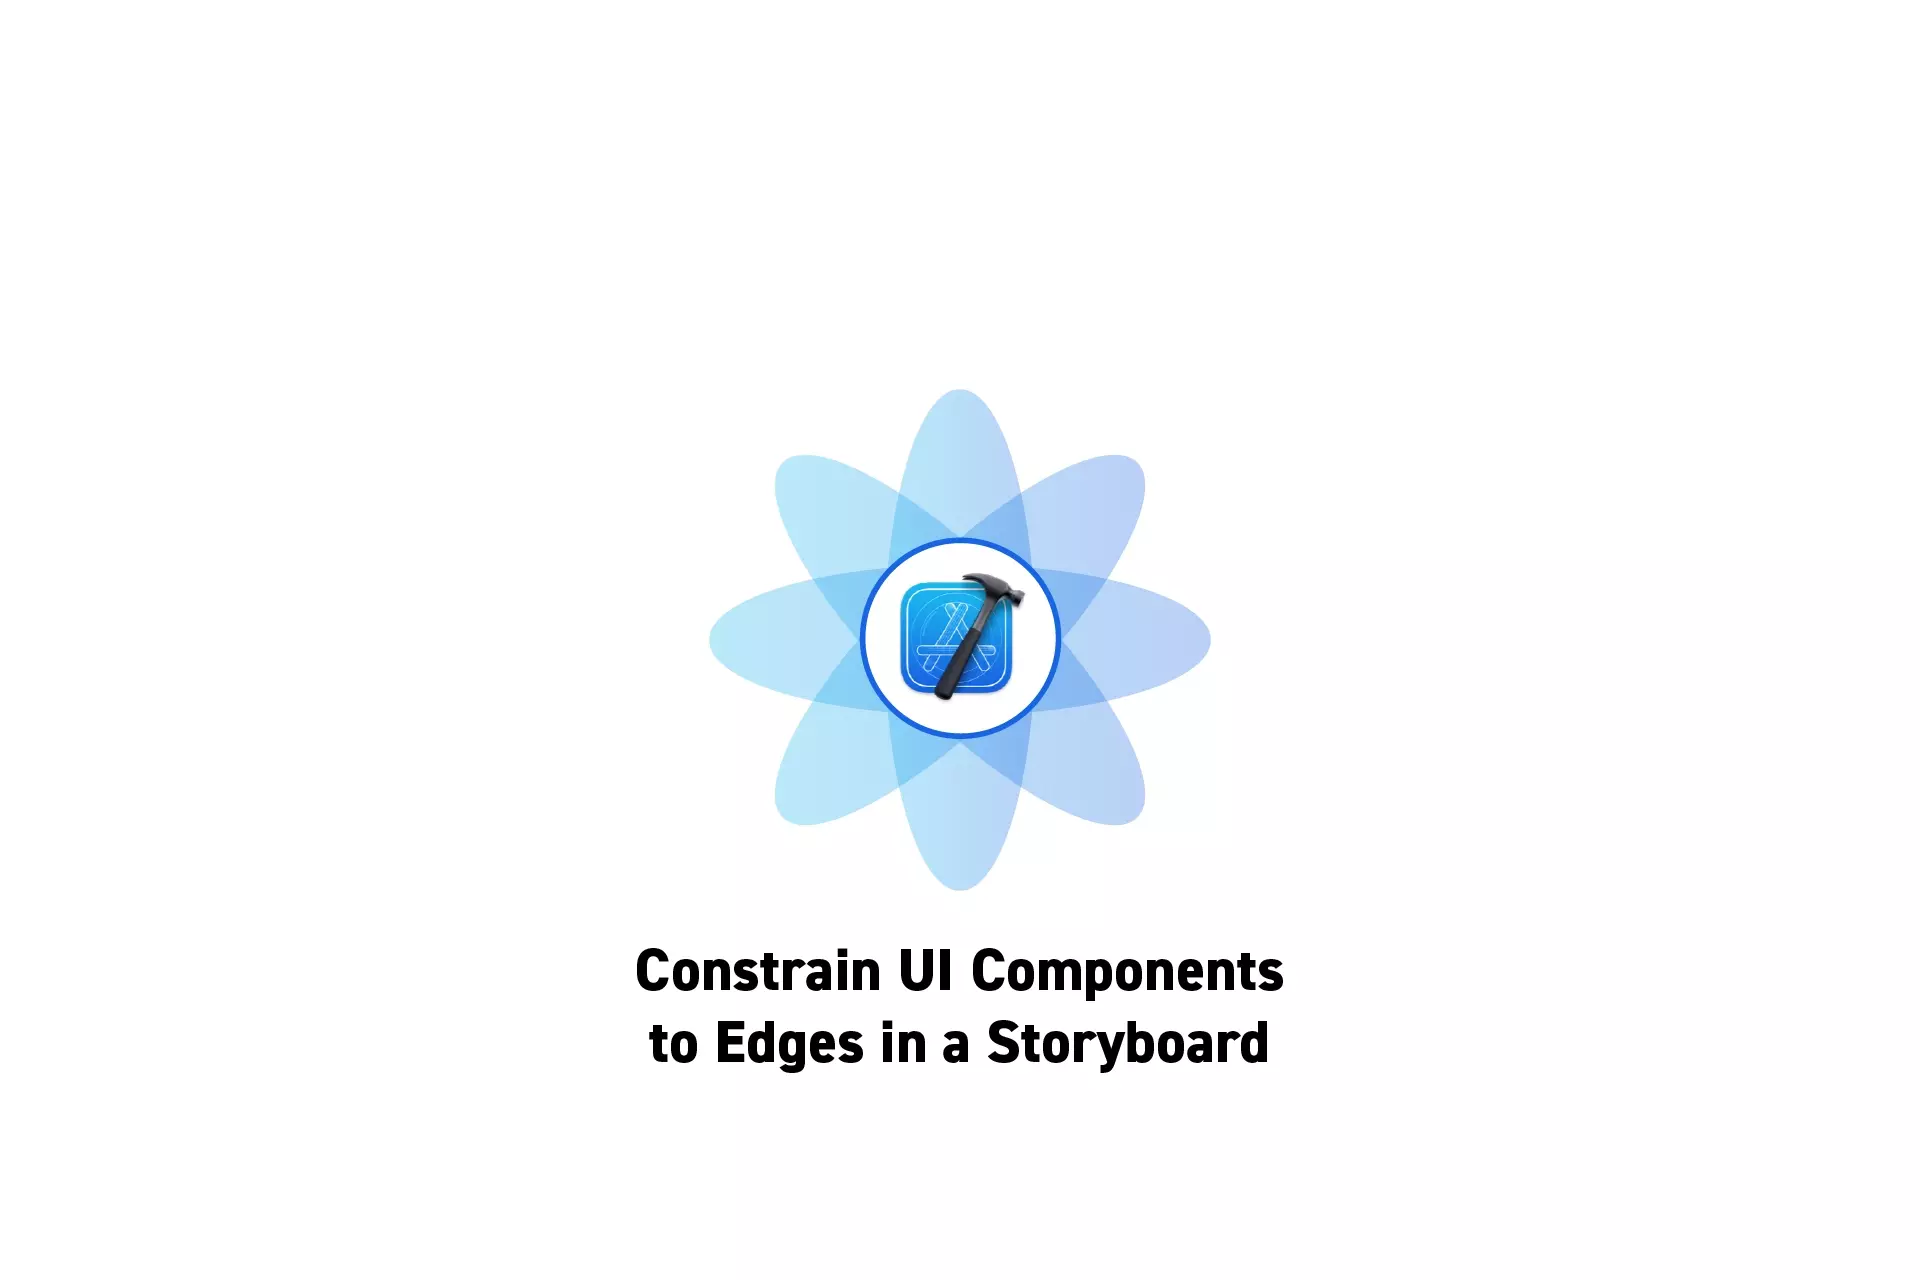 A flower that represents Xcode with the text "Constrain UI Components to Edges in a Storyboard" beneath it.